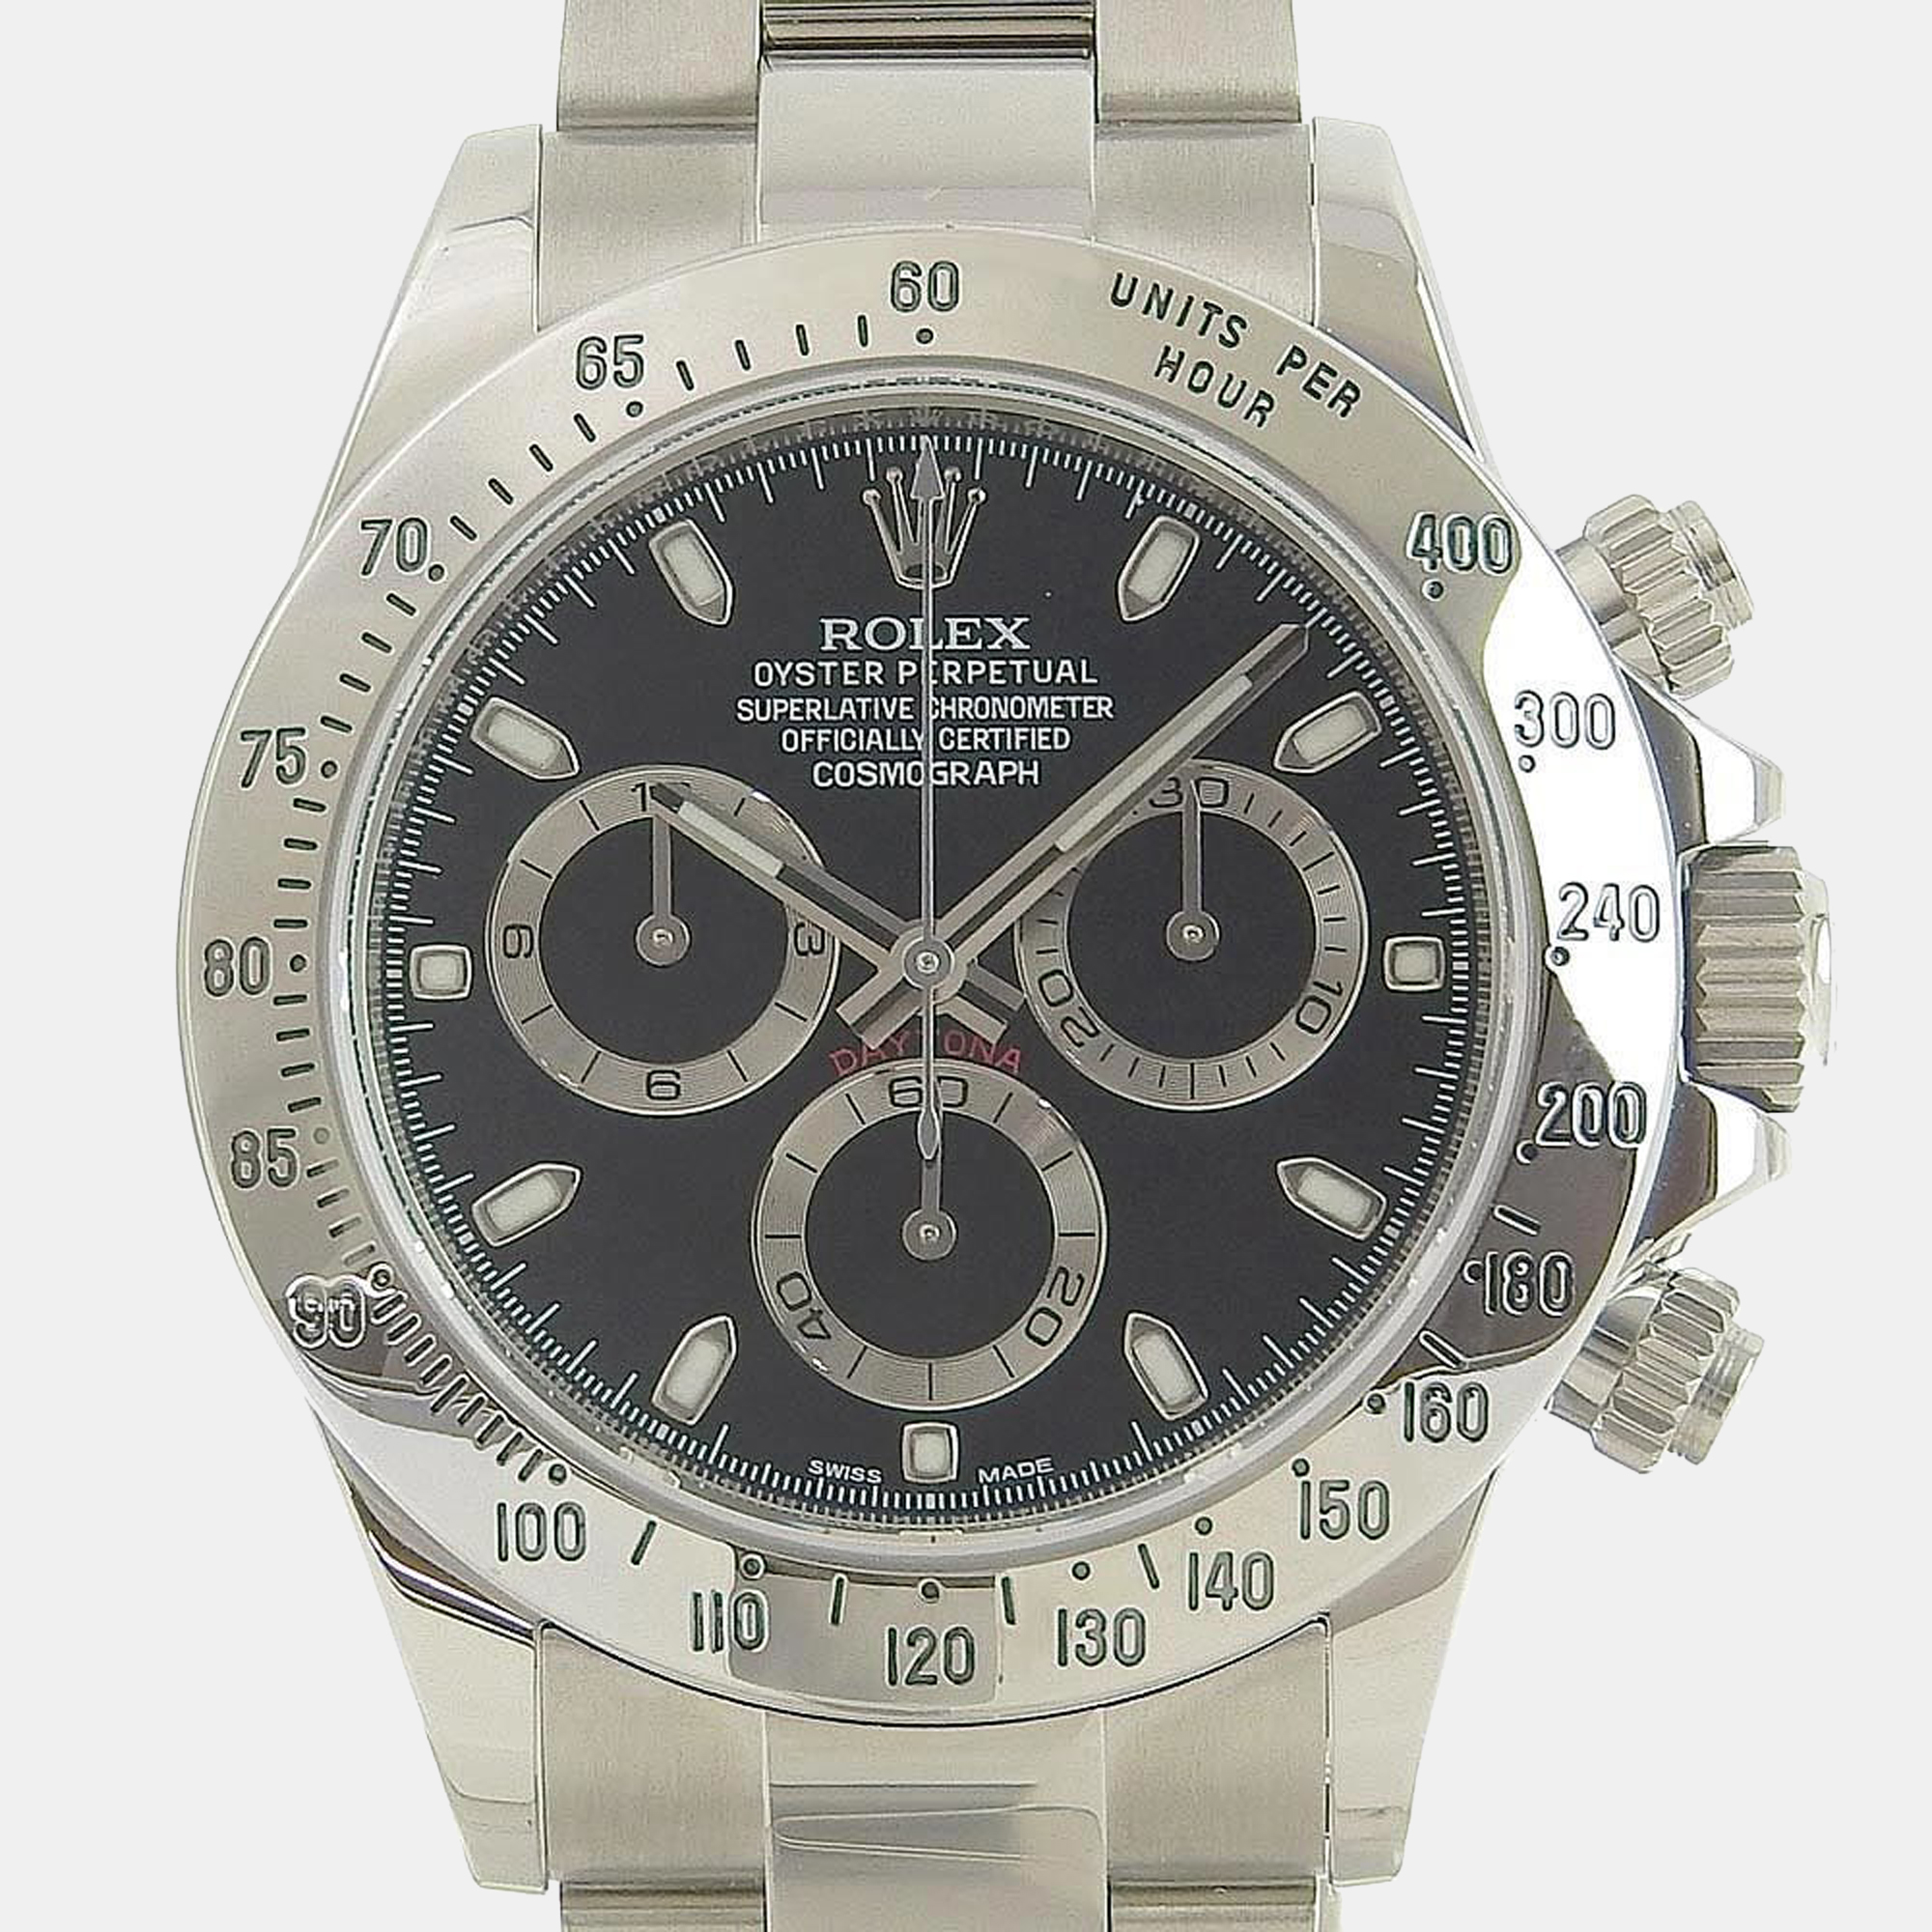 Pre-owned Rolex Black Stainless Steel Cosmograph Daytona 116520 Automatic Men's Wristwatch 40 Mm